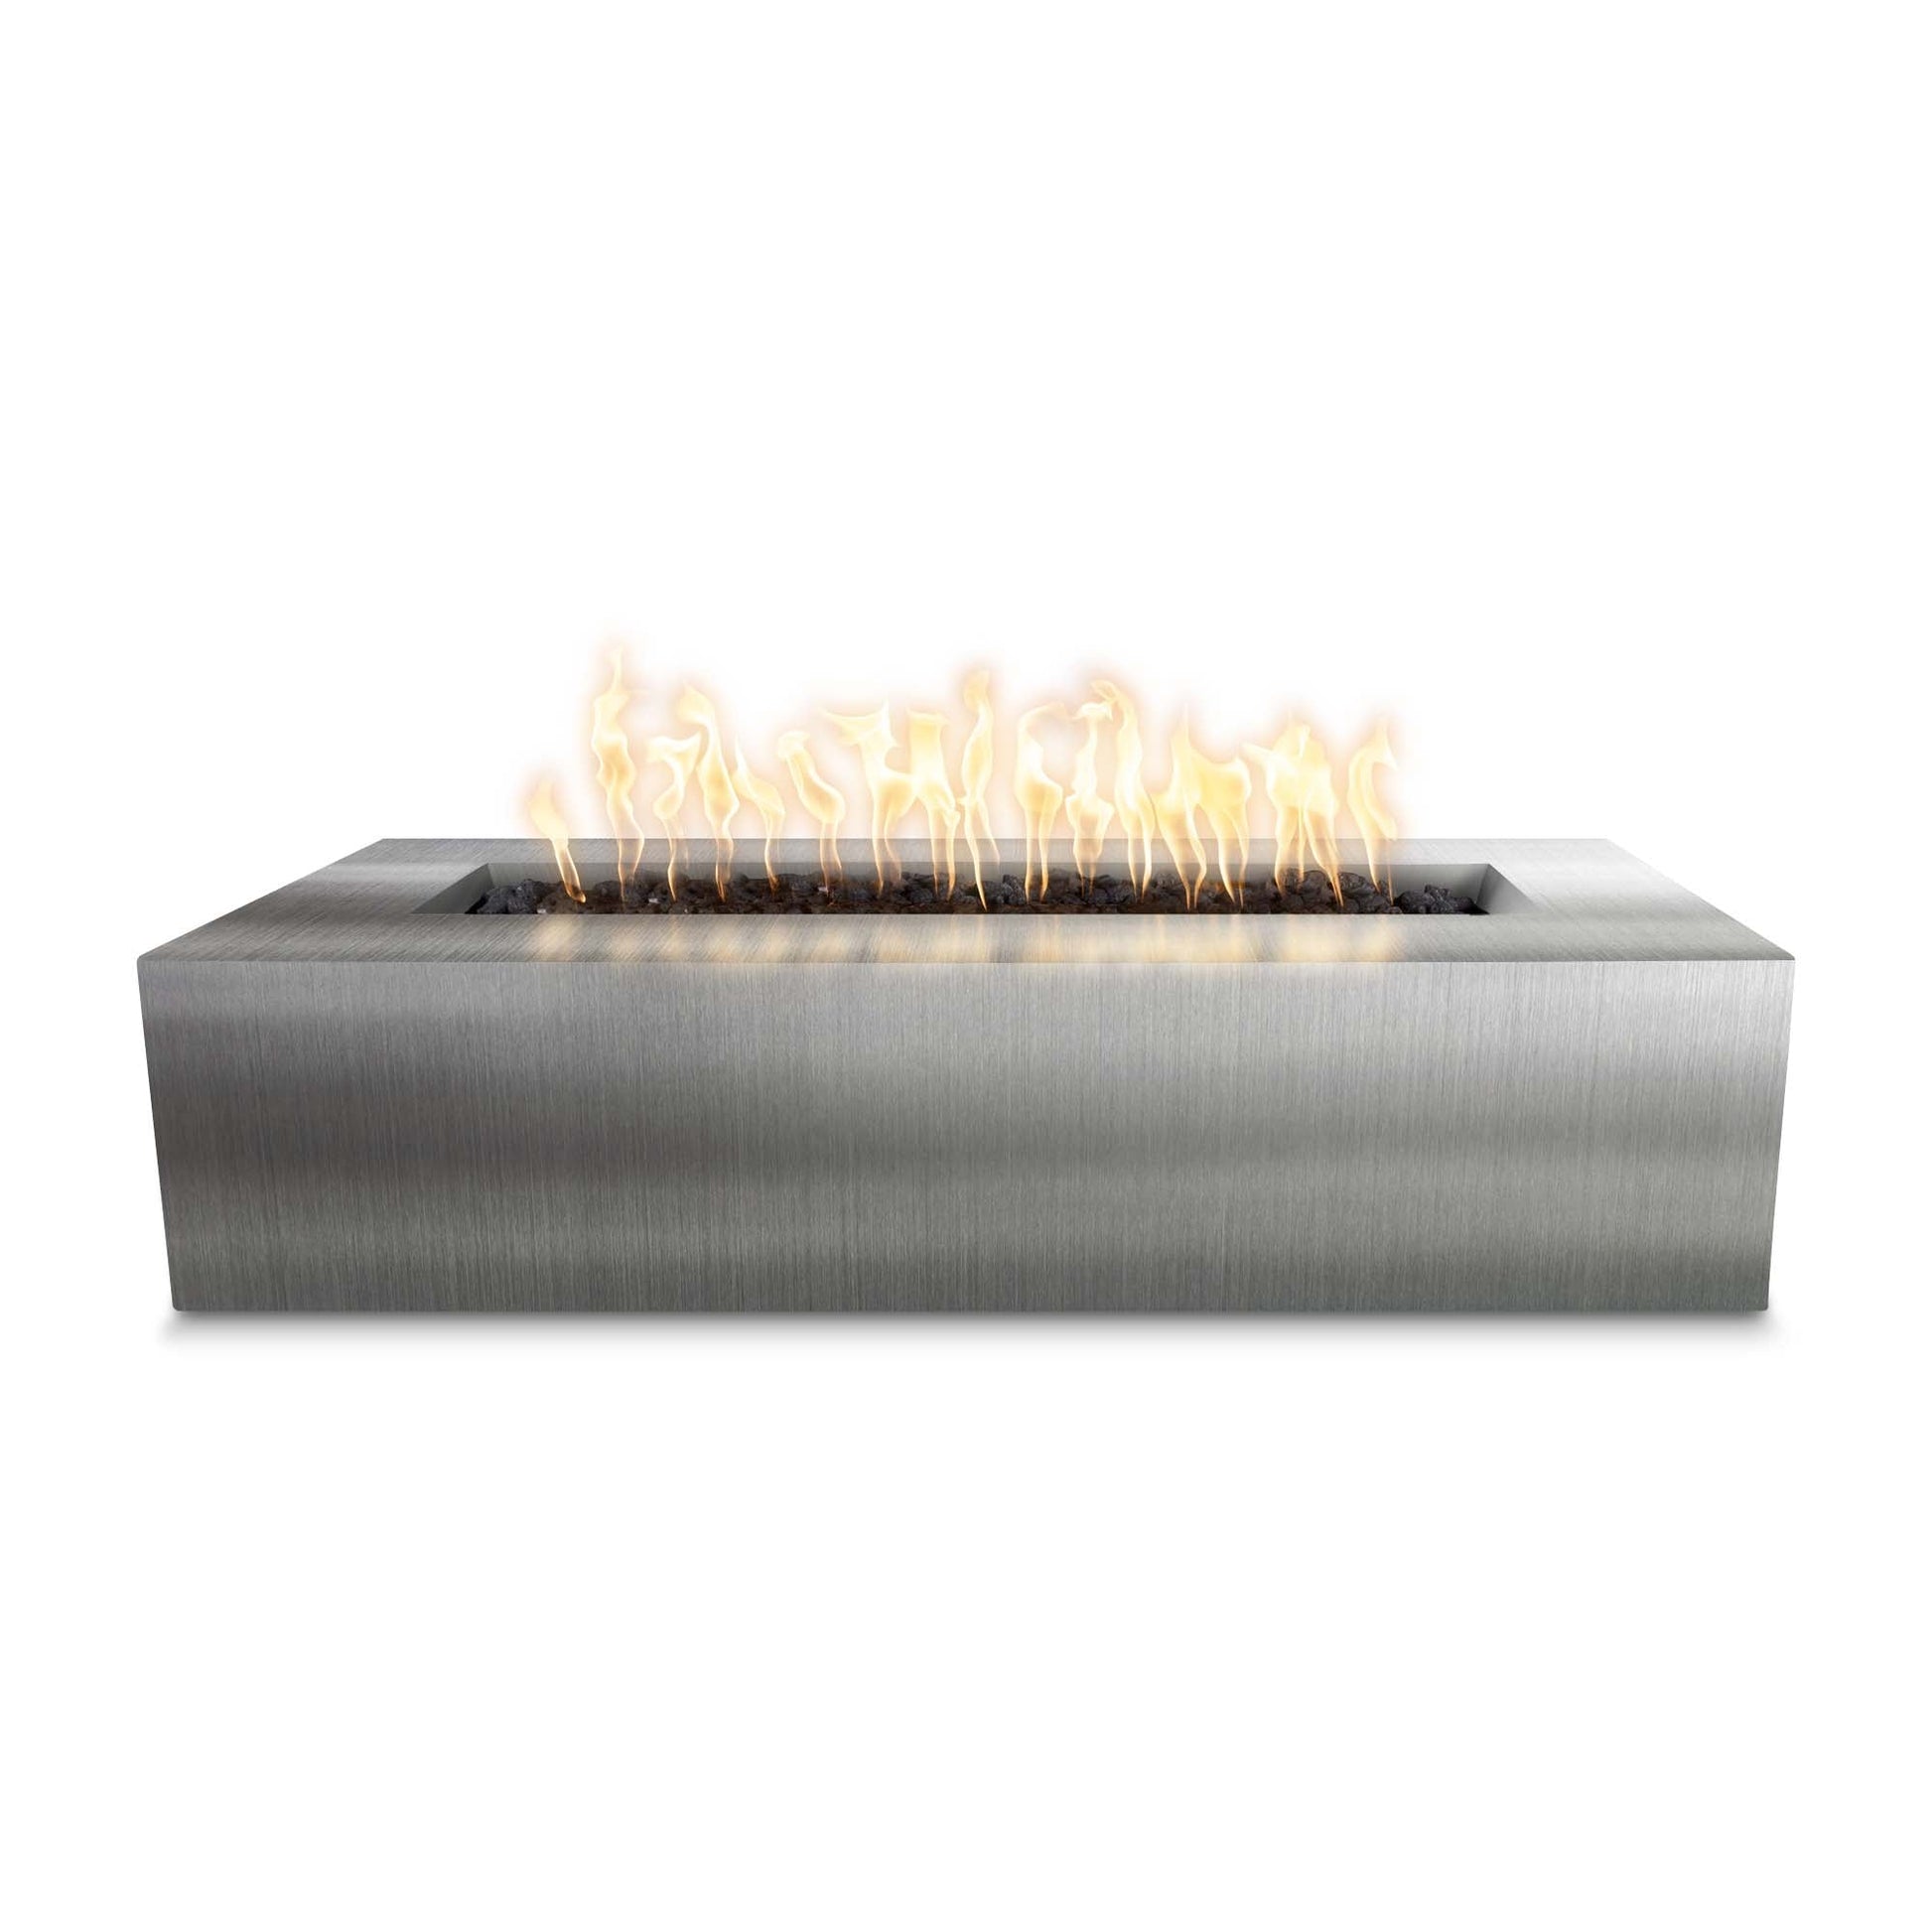 The Outdoor Plus Rectangular Regal 48" Stainless Steel Liquid Propane Fire Pit with Match Lit with Flame Sense Ignition